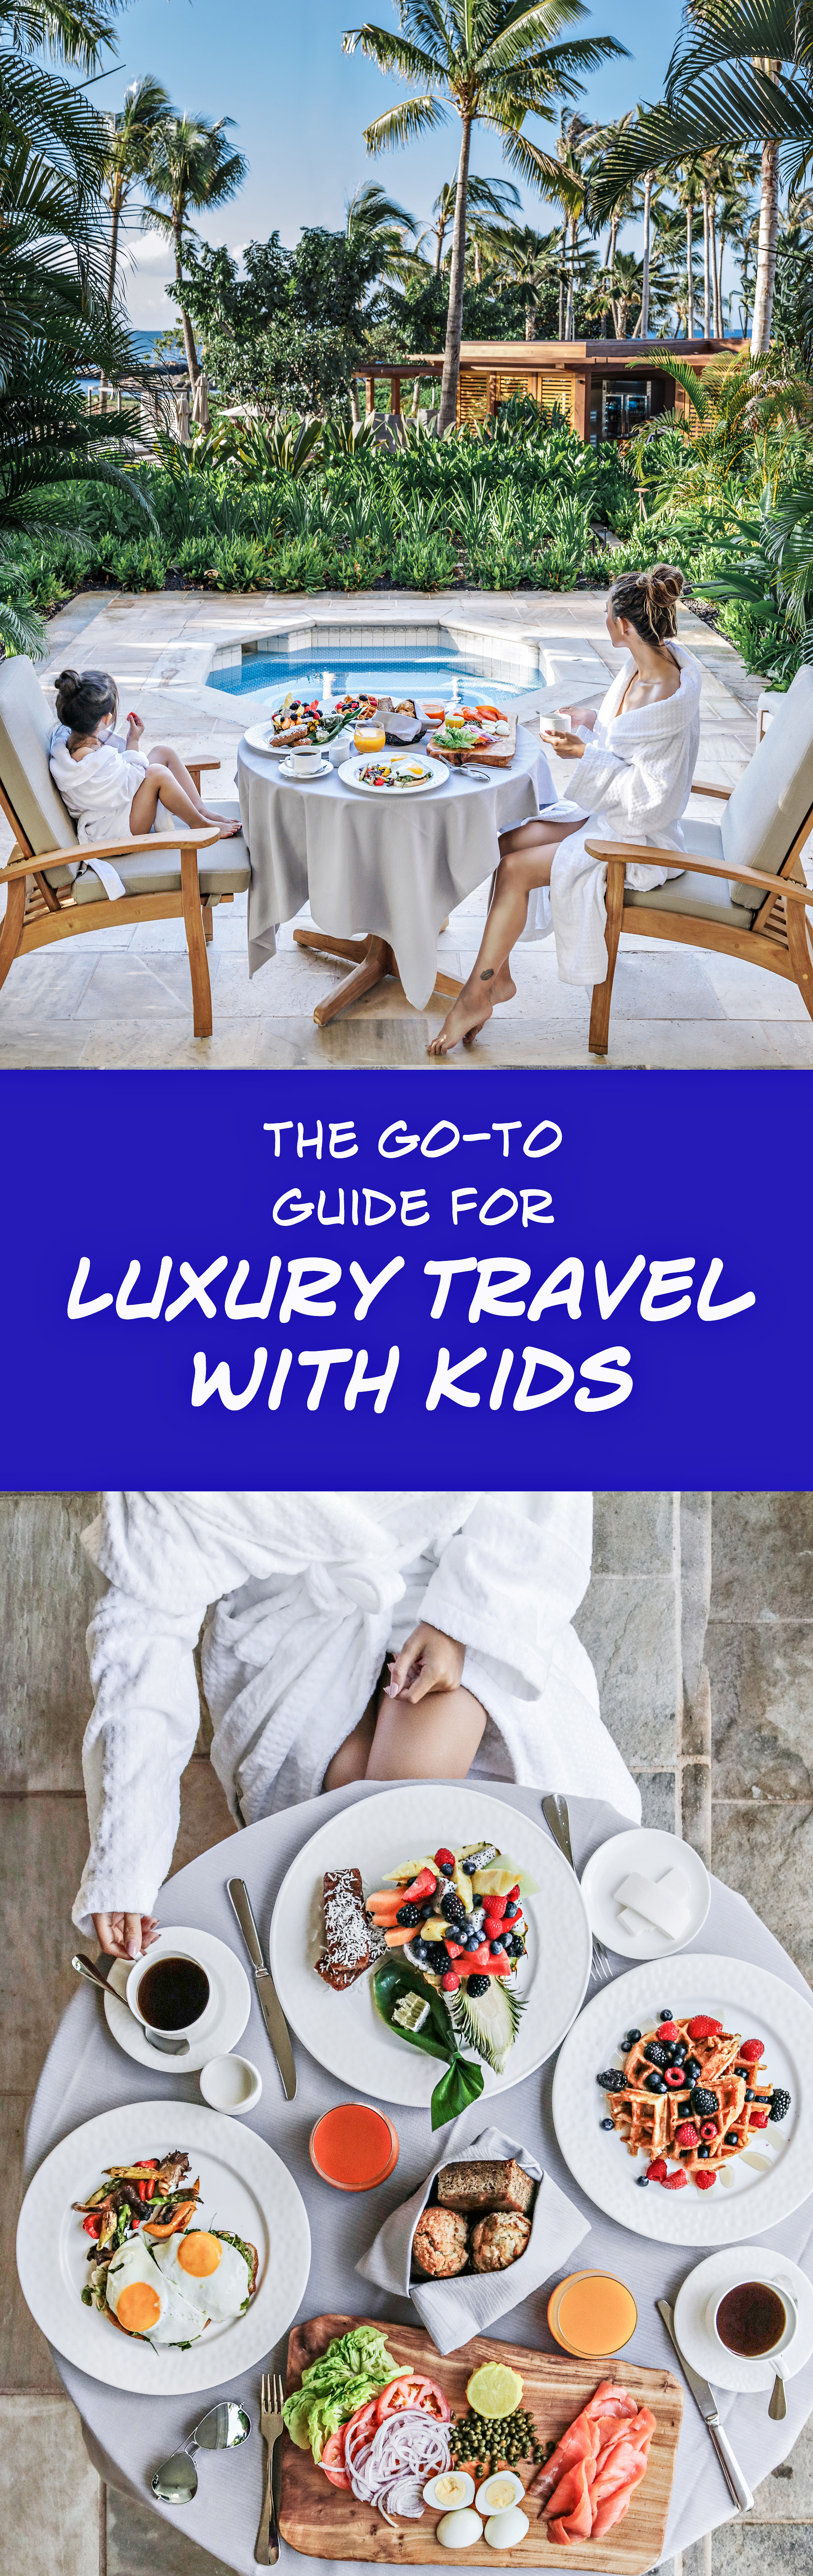 The Go-To Guide for Luxury Travel with Kids - Hawaii 2017 // NotJessFashion.com